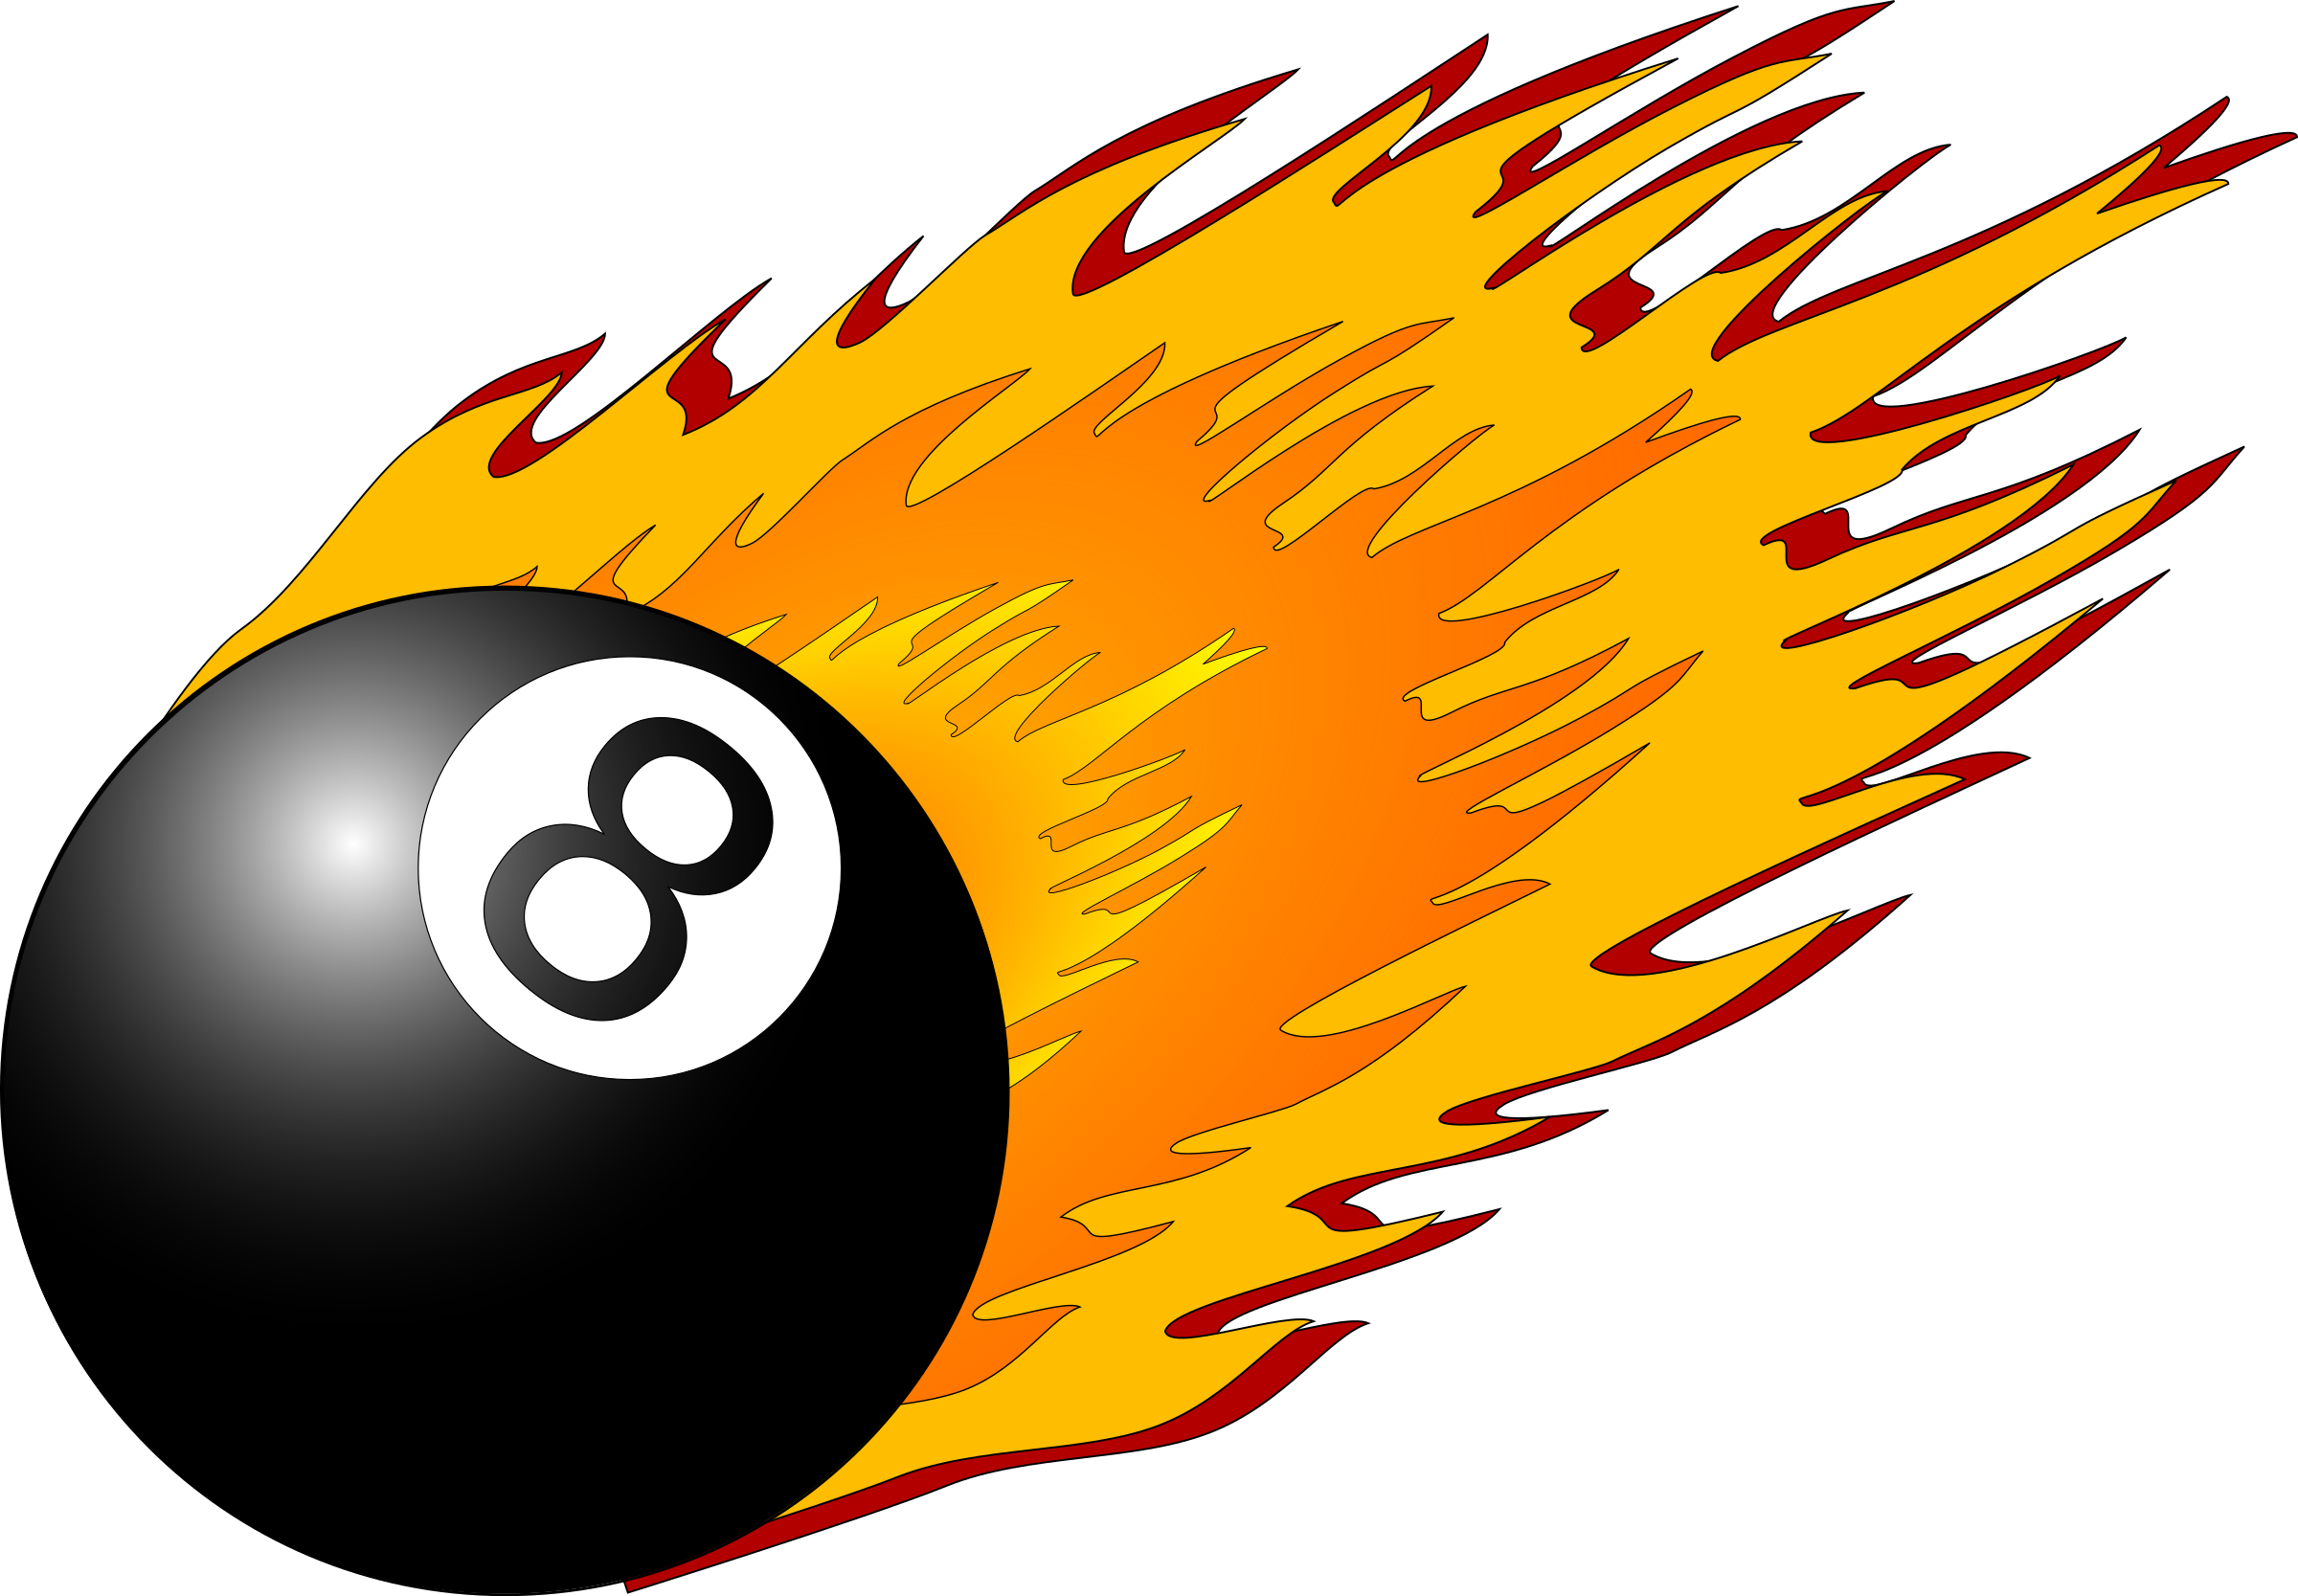  ball with icons. Flames clipart vector art